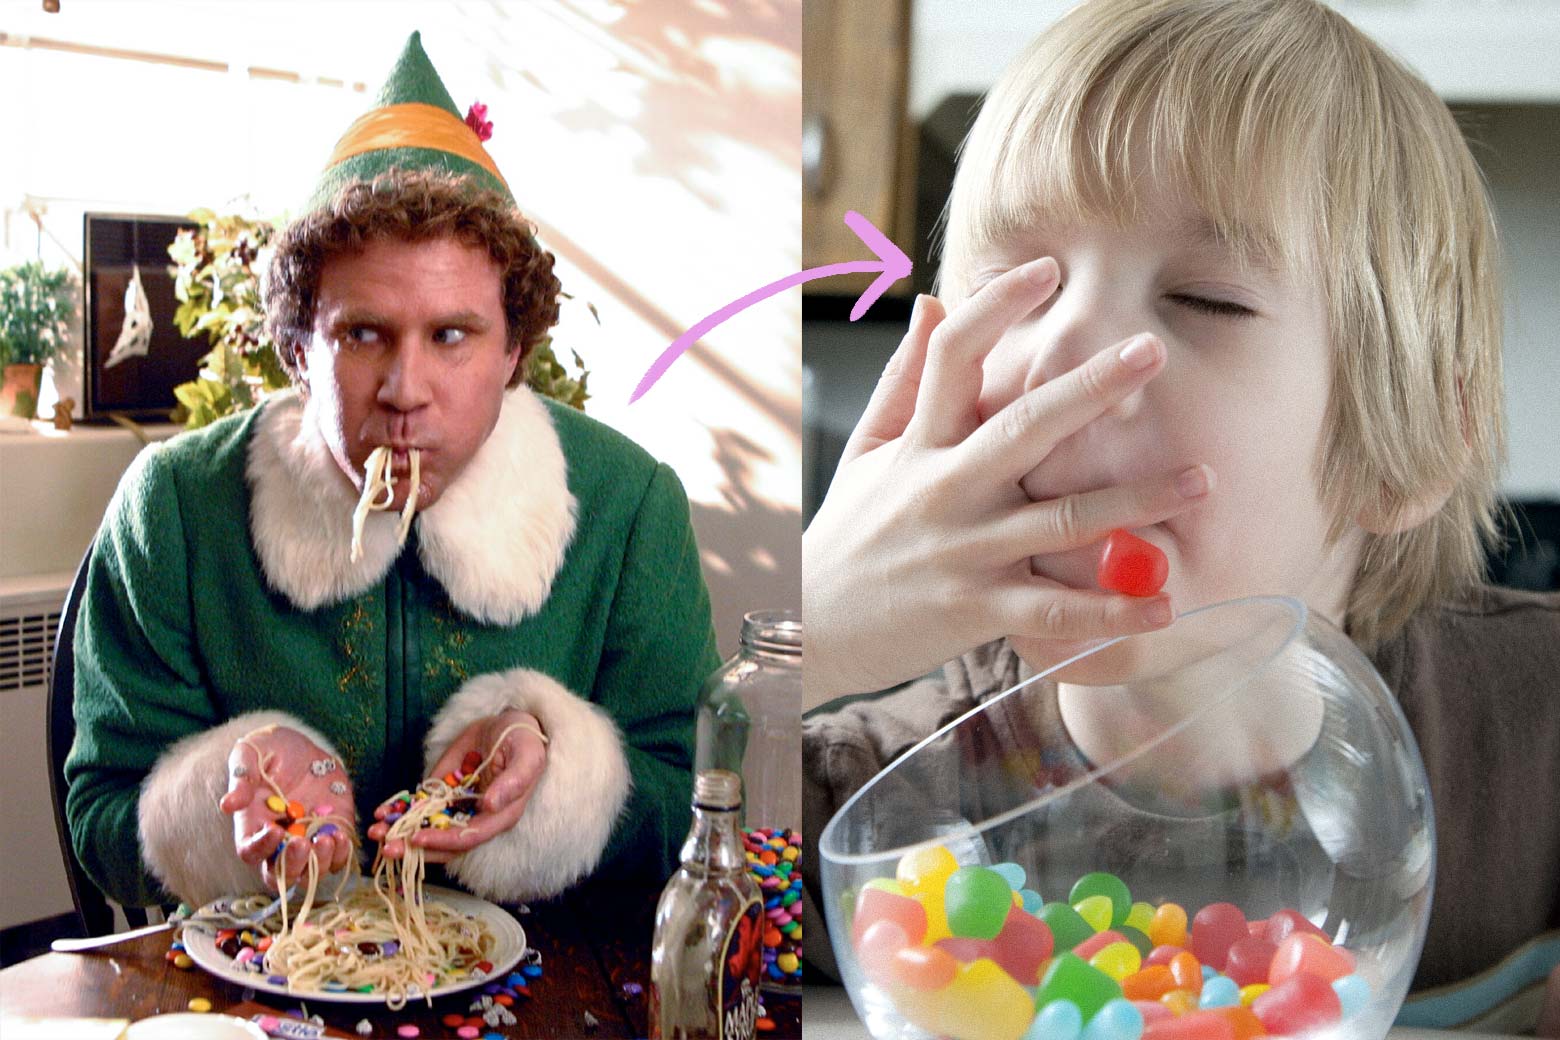 Buddy the Elf eats a meal consisting primarily of candy, and so does a little kid.